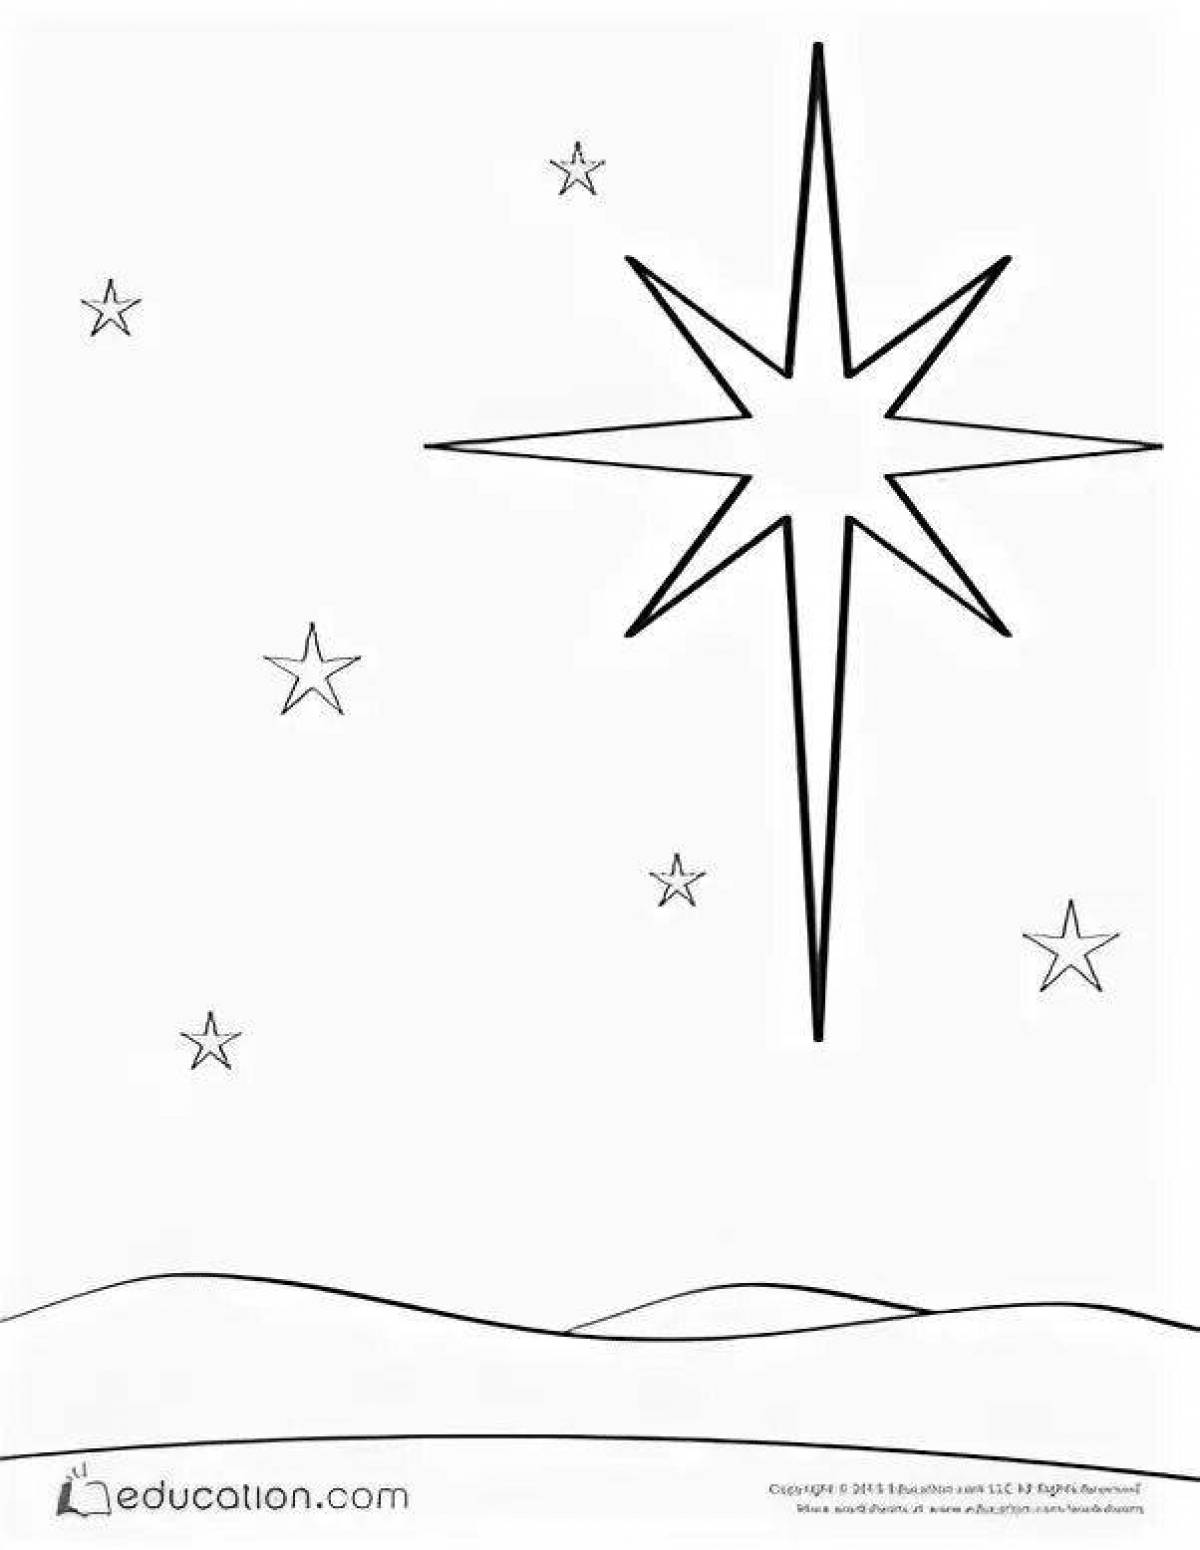 Greatness coloring star of Bethlehem drawing